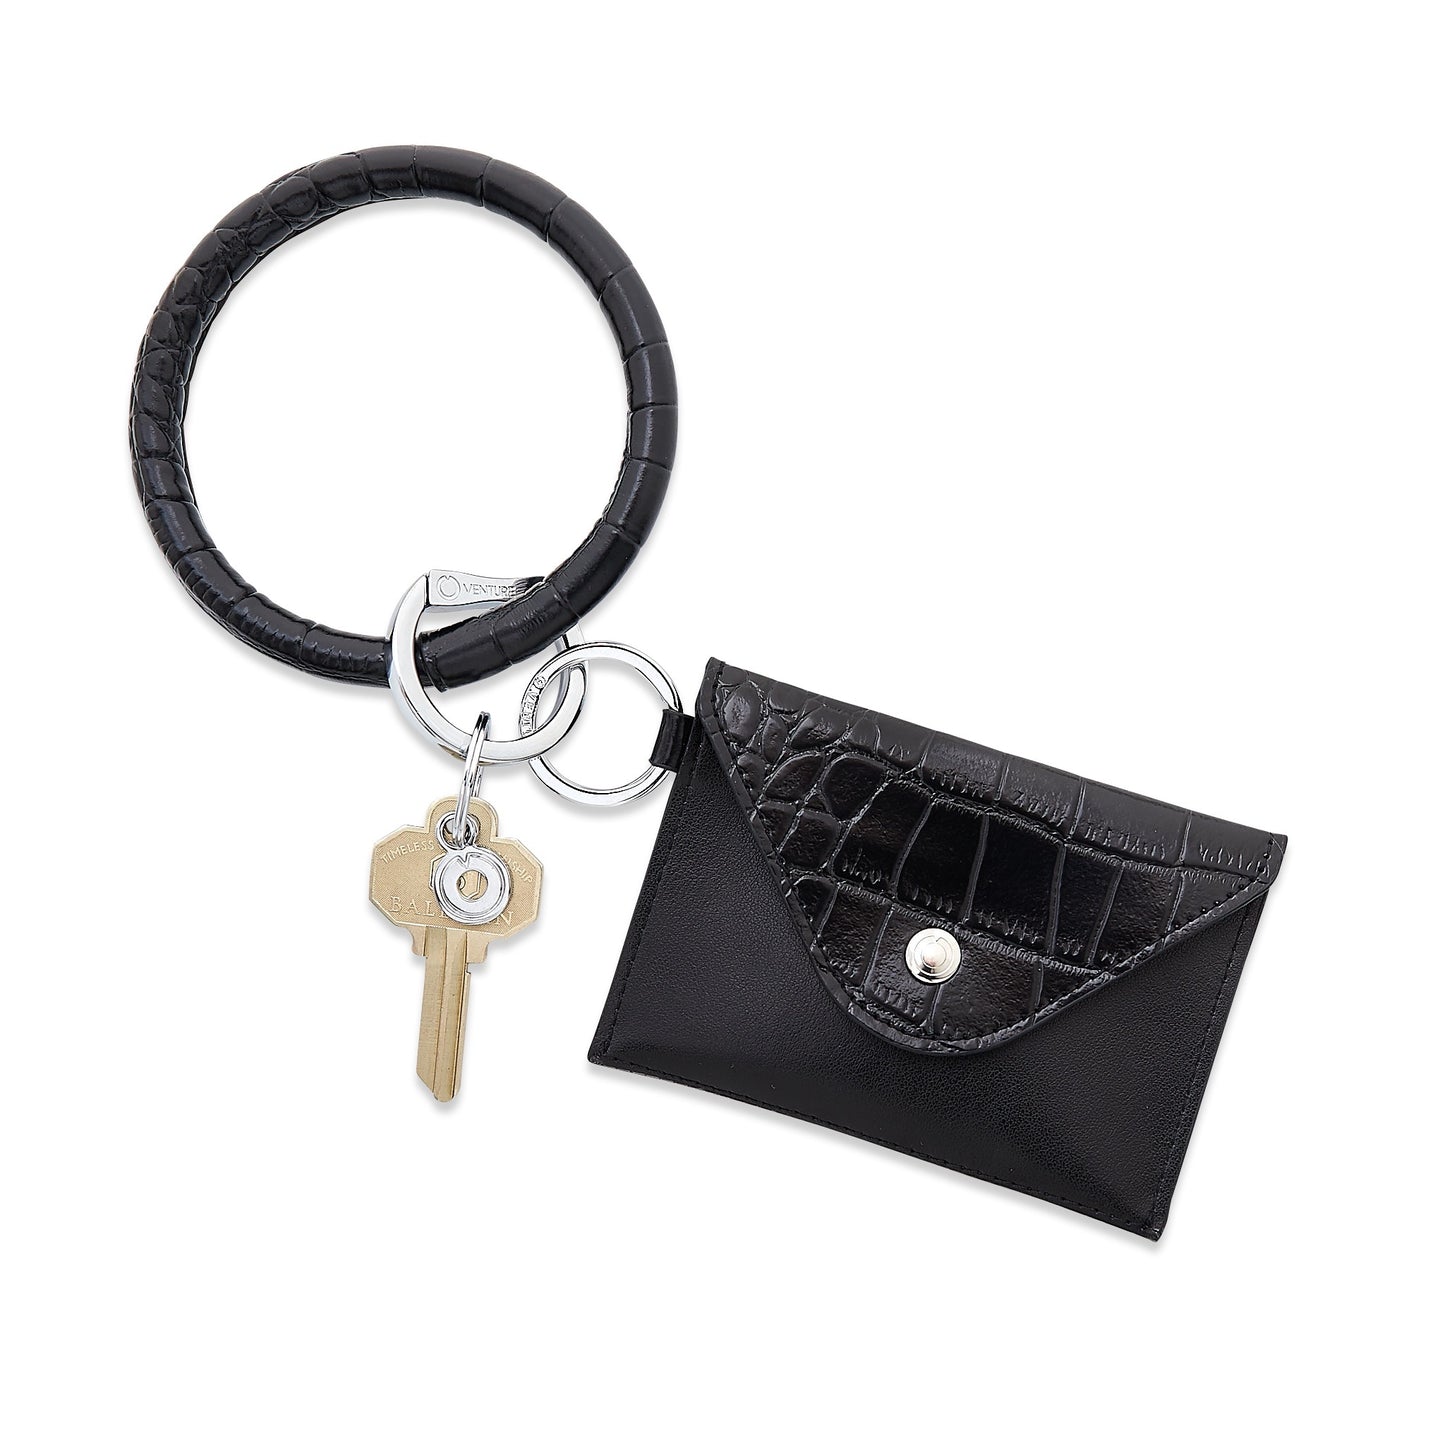 Stylish leather keychain wallet in mini envelope design shown attached to an O Venture keyring.